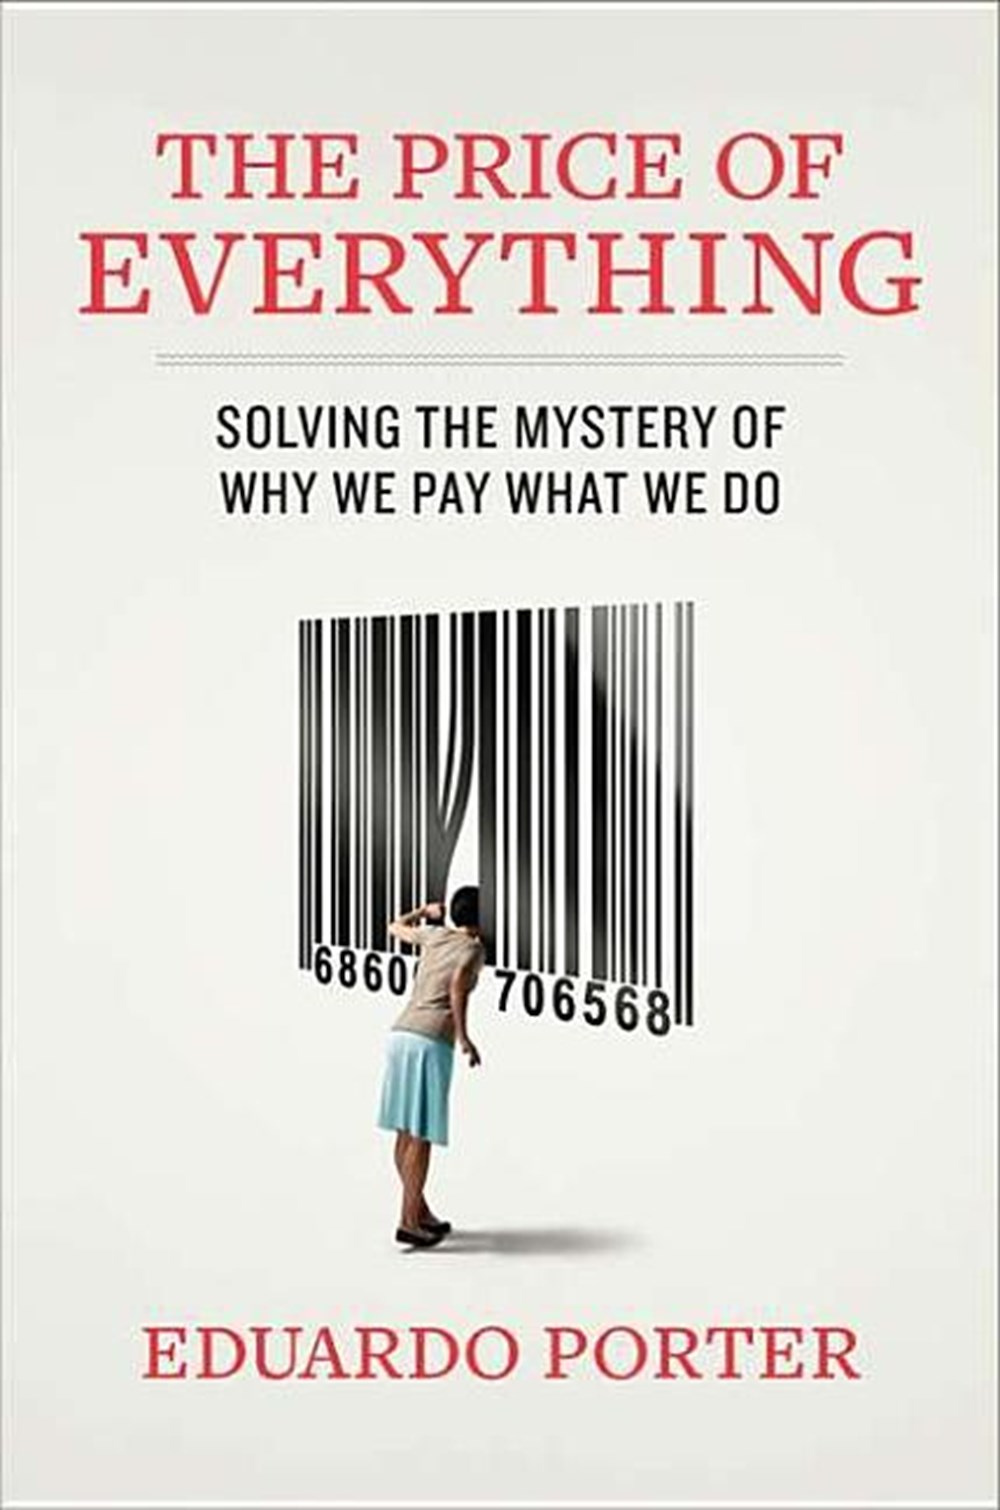 Price of Everything Solving the Mystery of Why We Pay What We Do